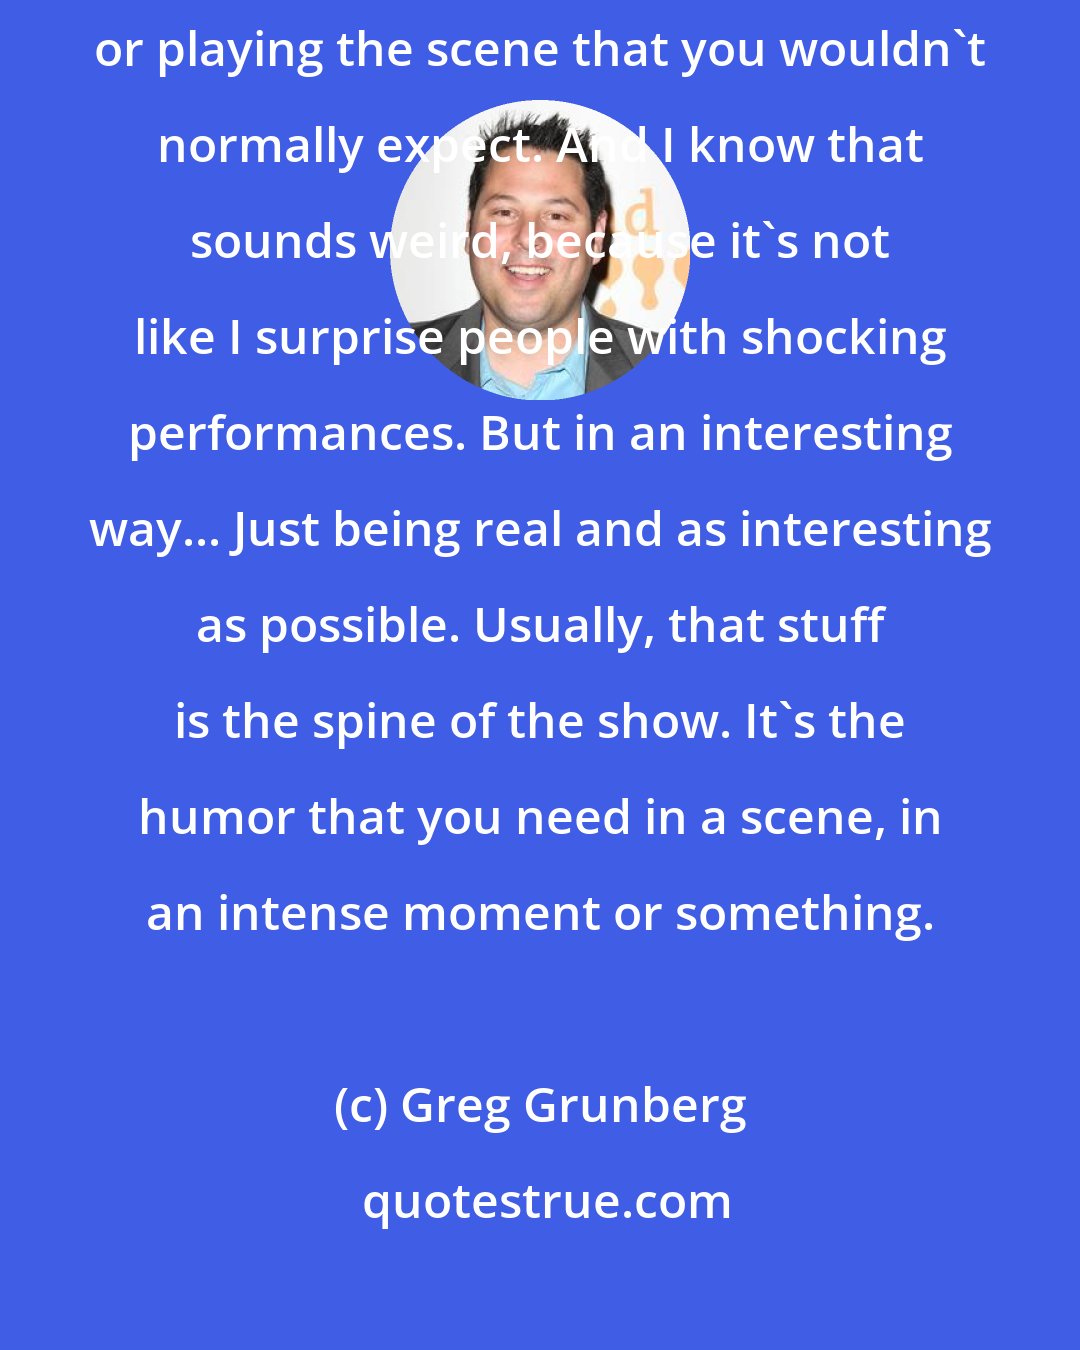 Greg Grunberg: I always try to find something or some way of delivering the lines or playing the scene that you wouldn't normally expect. And I know that sounds weird, because it's not like I surprise people with shocking performances. But in an interesting way... Just being real and as interesting as possible. Usually, that stuff is the spine of the show. It's the humor that you need in a scene, in an intense moment or something.